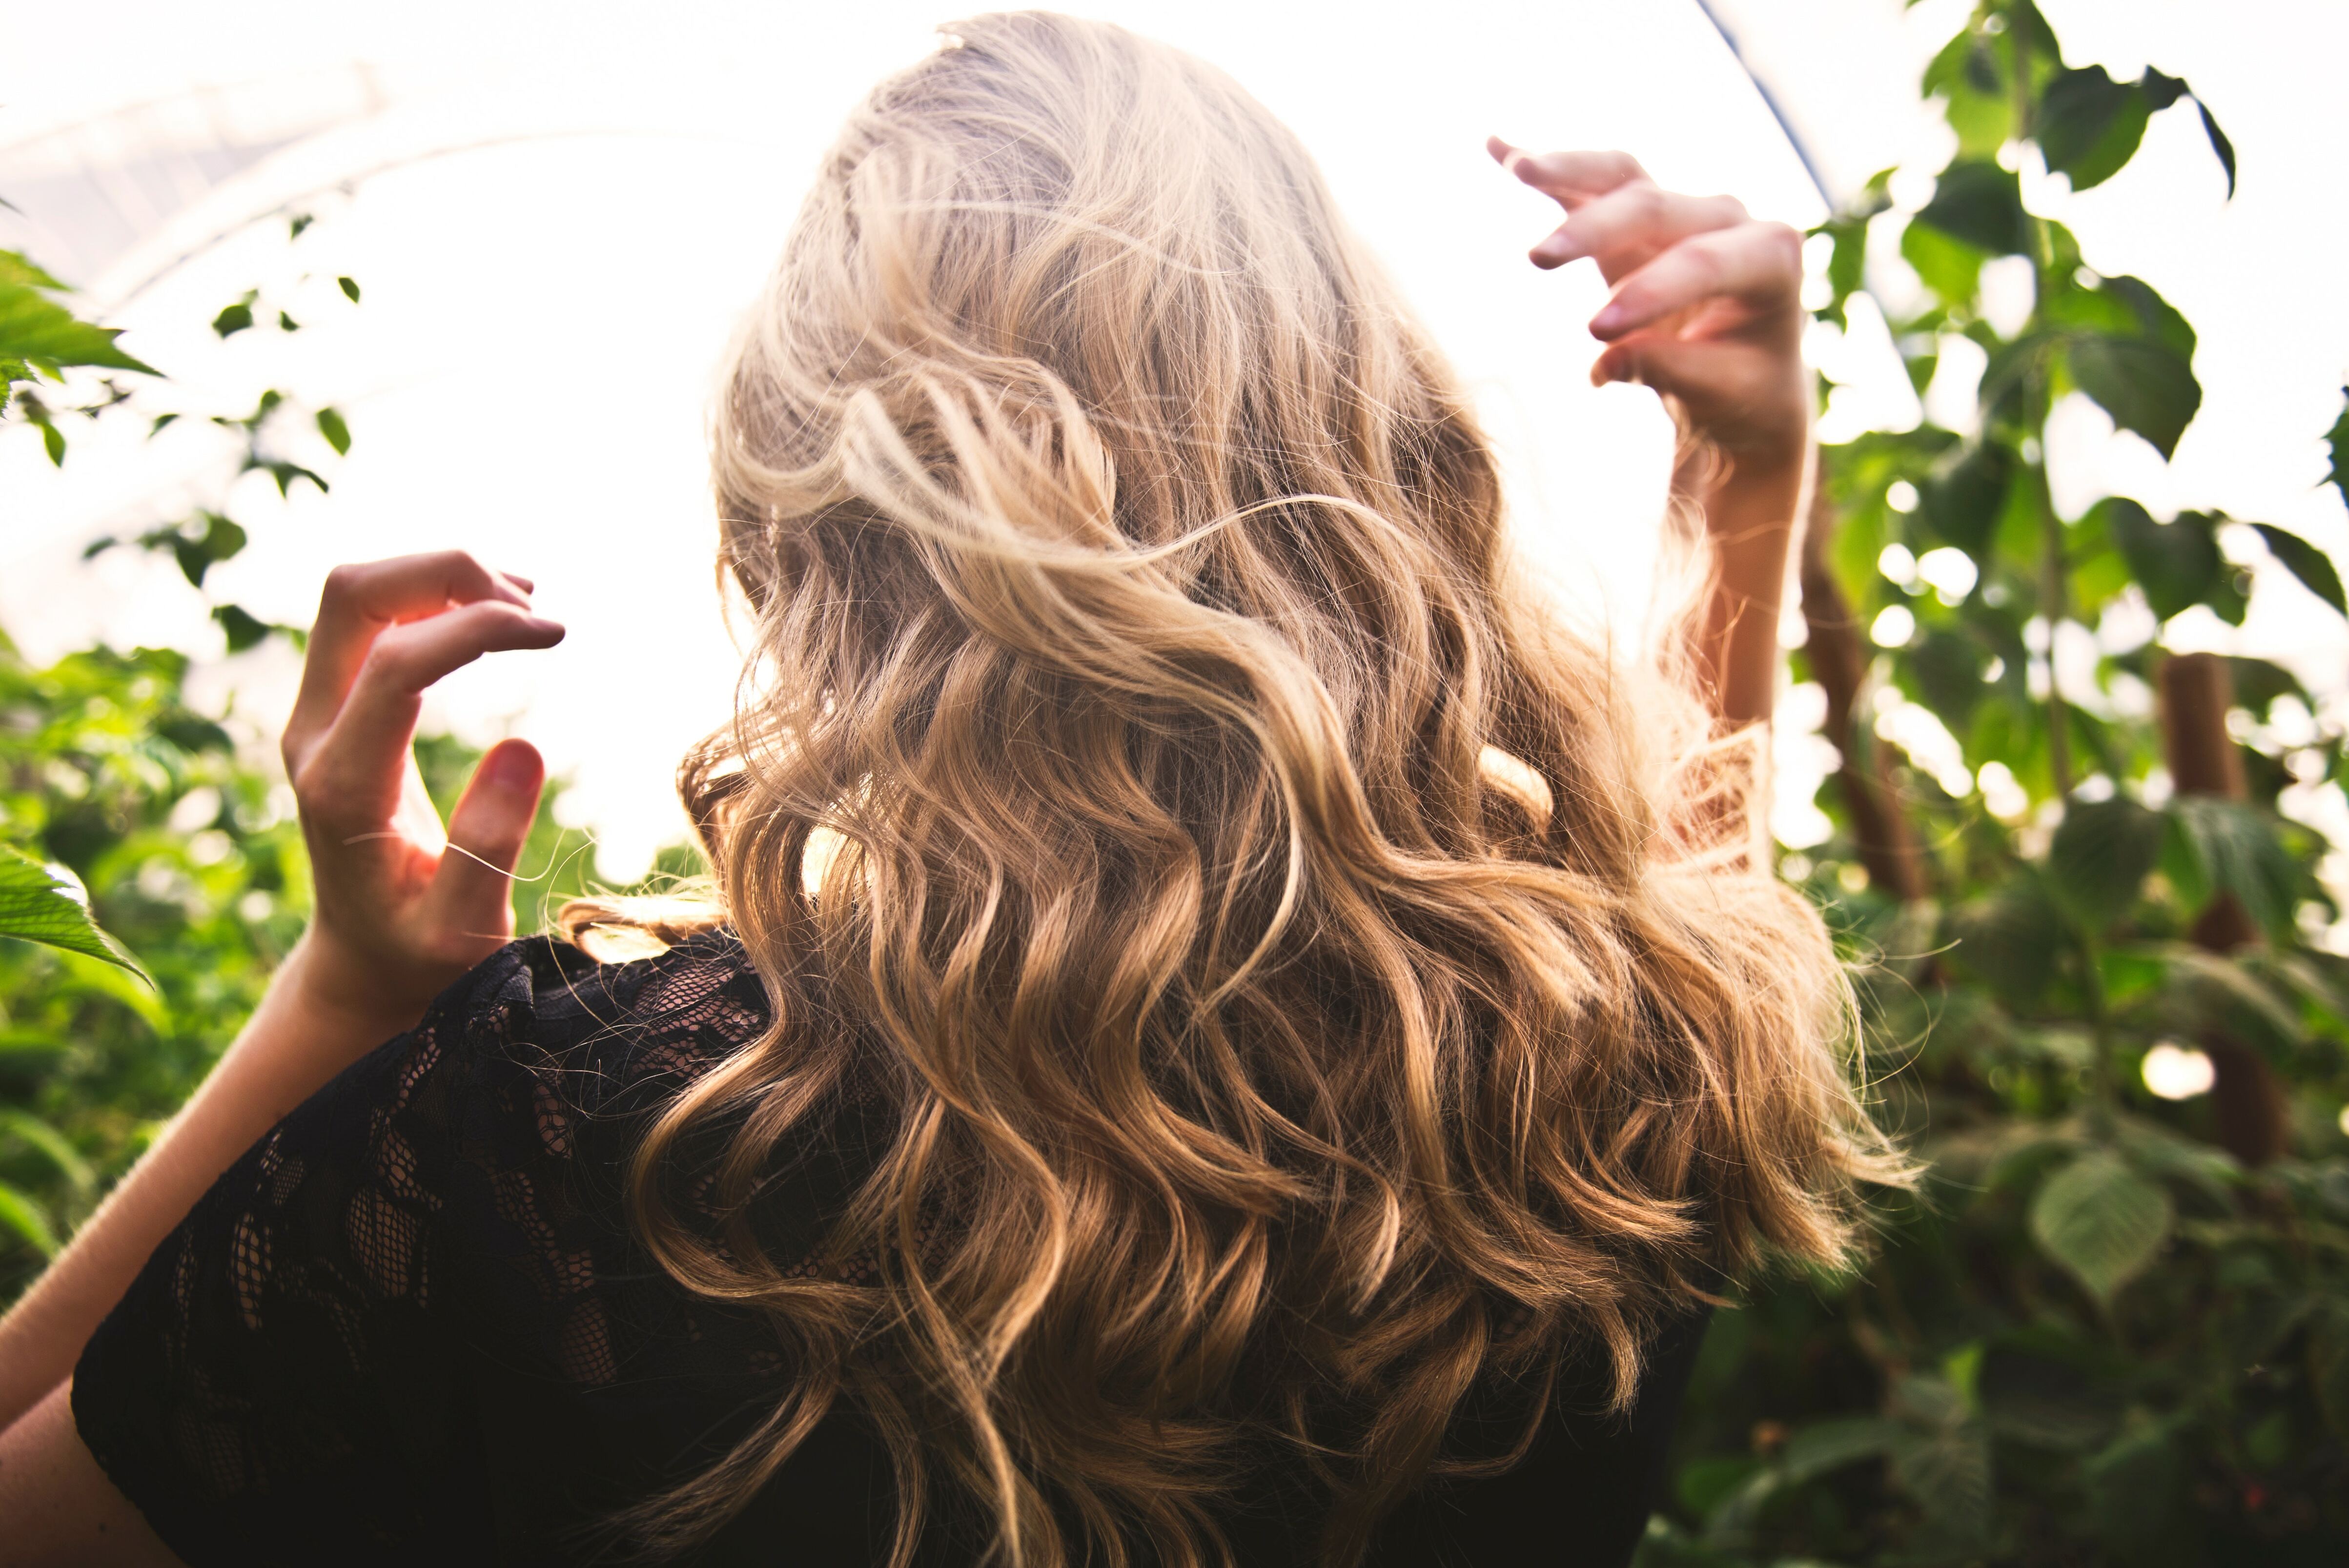 Back of woman's head with blonde hair surrounded by greenery